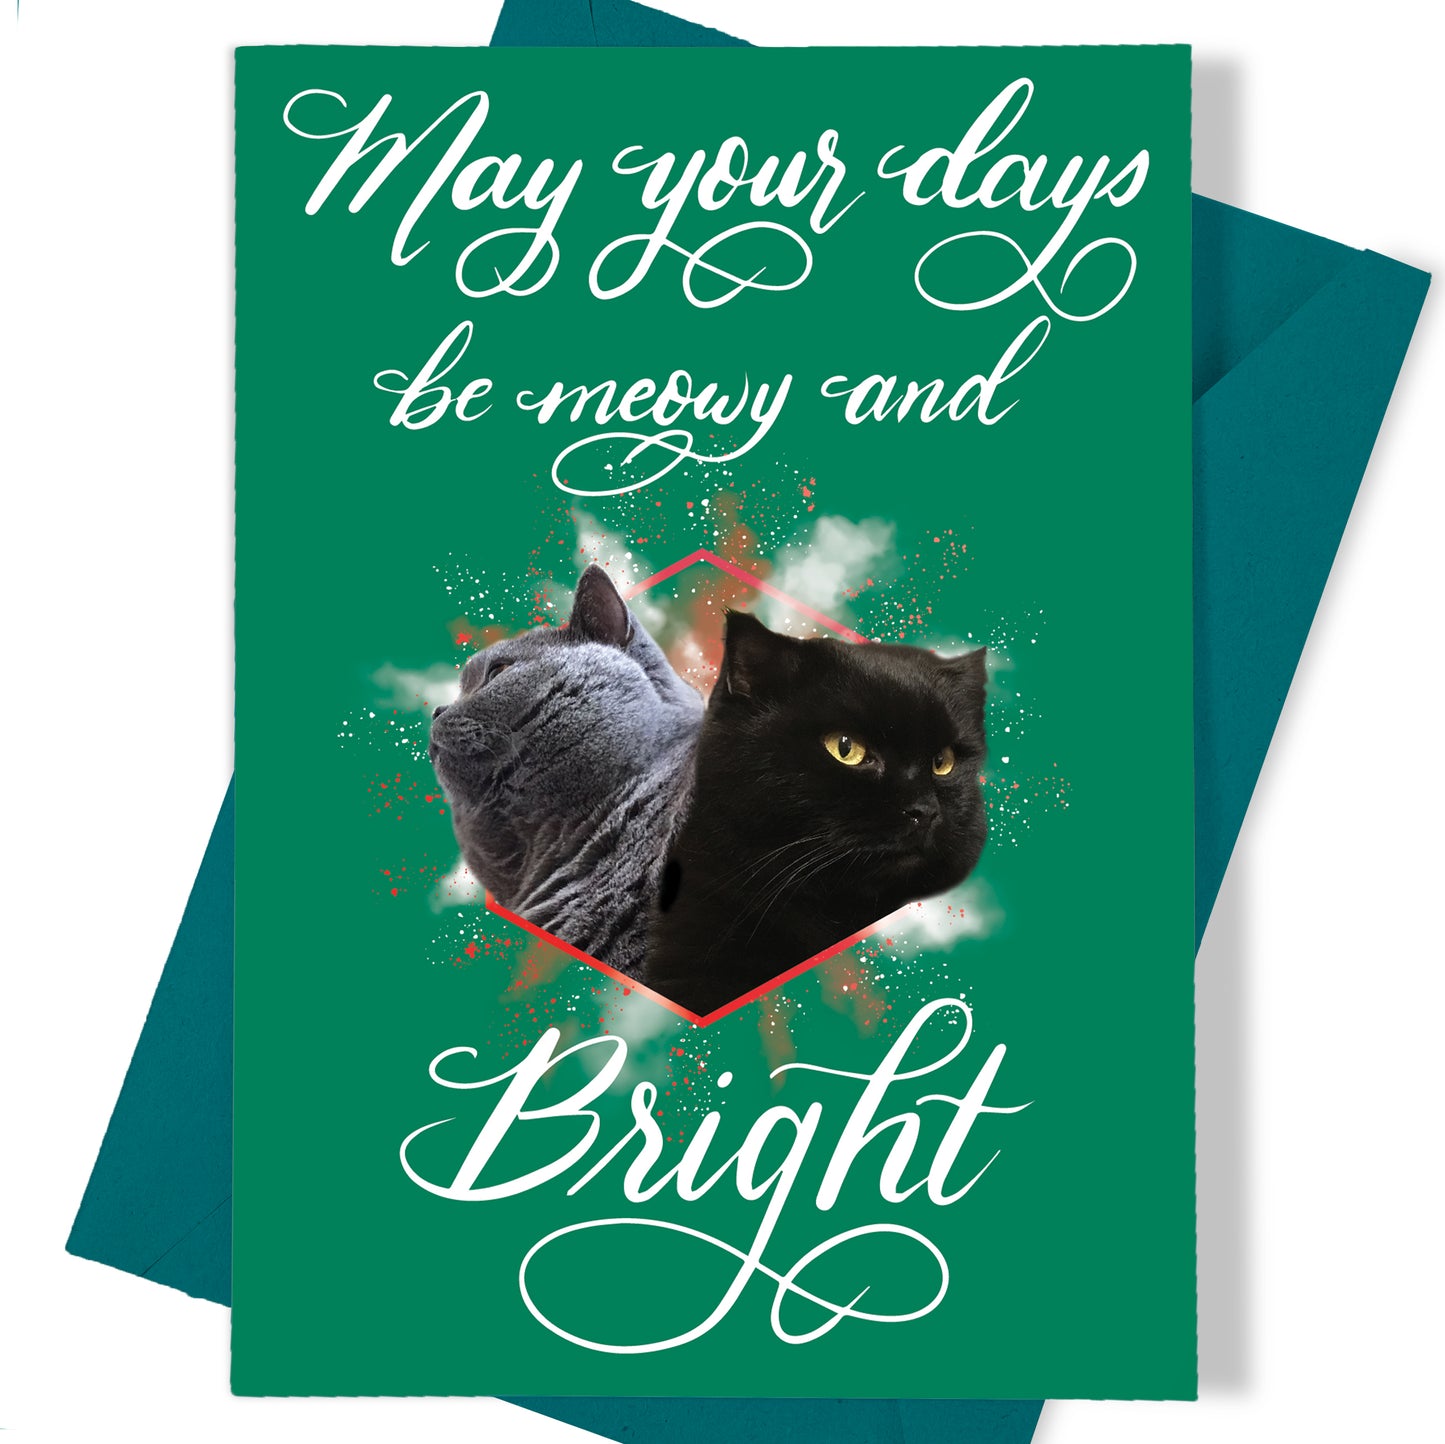 A thumbnail view of the greeting card: "May Your Days be Meowy and Bright!"